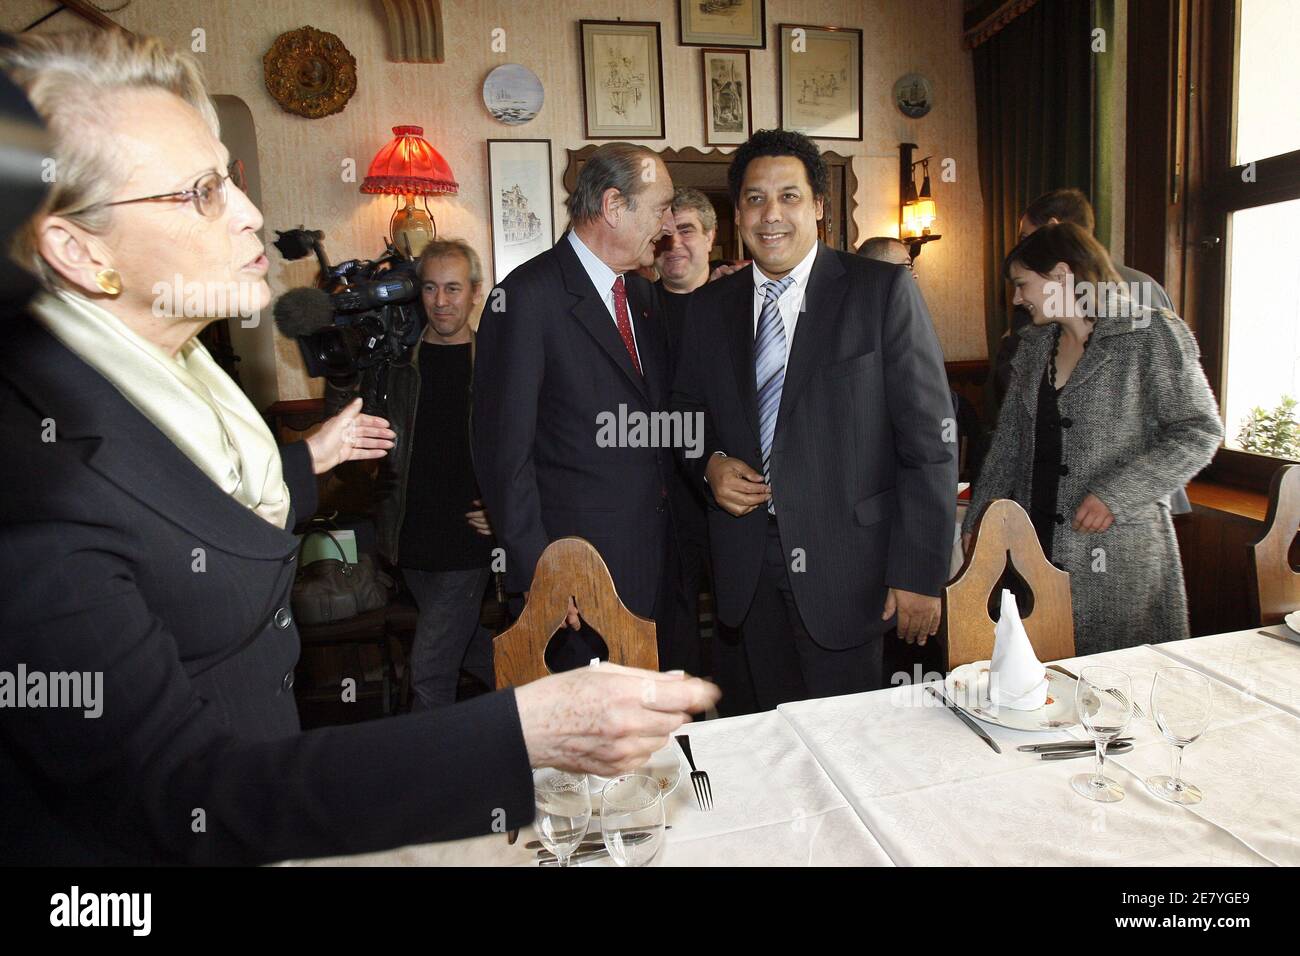 President Jacques Chirac and Defense Minister of Michele Alliot-Marie have lunch with former rugby player Serge Blanco at restaurant 'Chez Margot' in Ciboure, south-west of France on April 3, 2007. Photo by Bernard Bisson/ABACAPRESS.COM Stock Photo